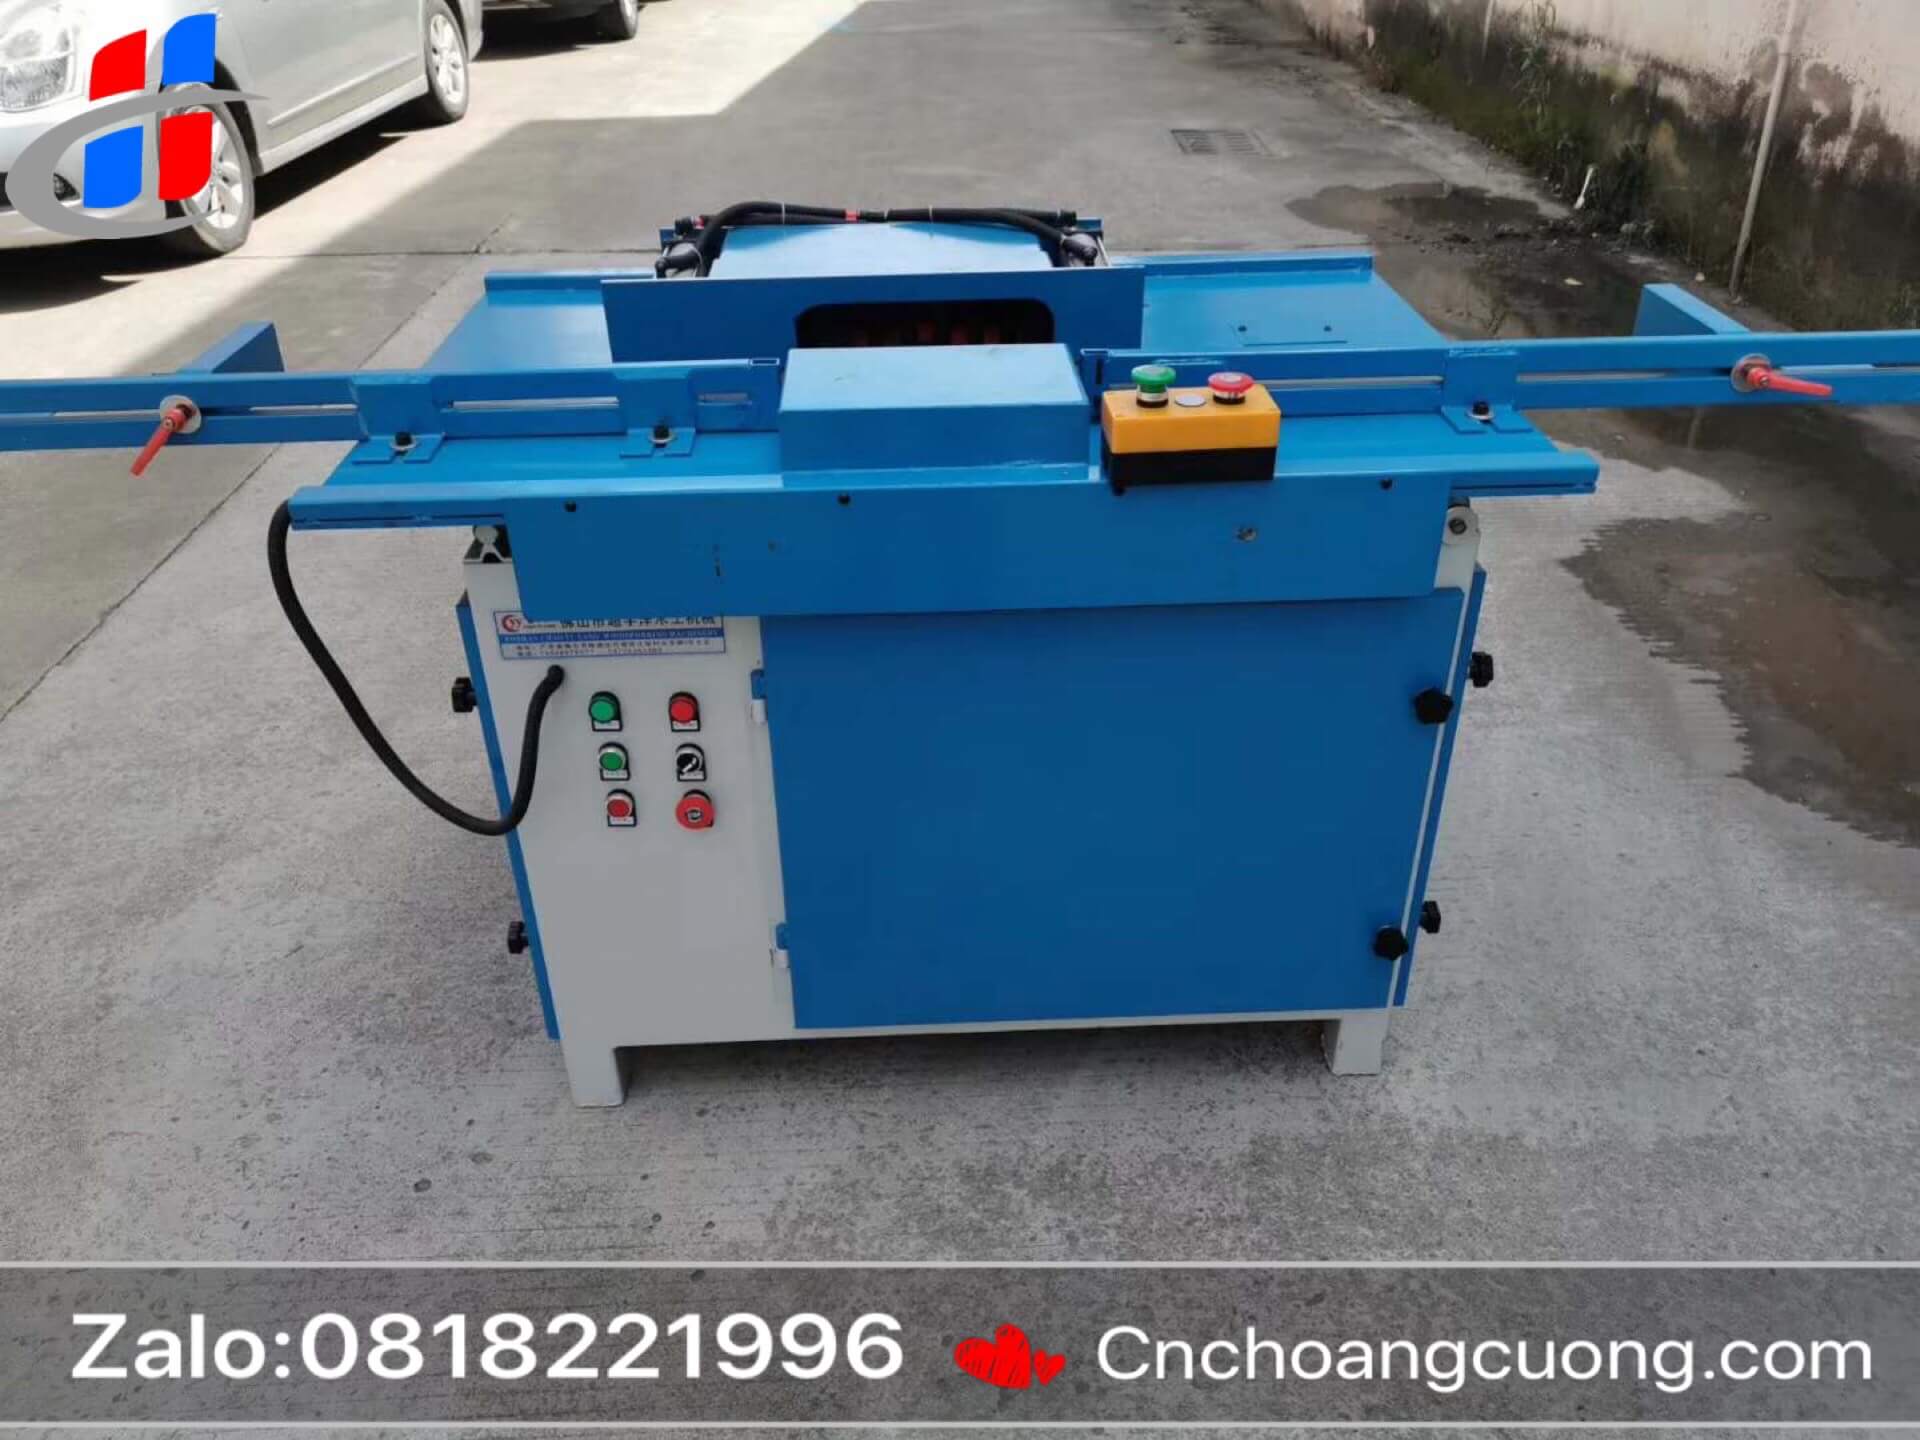 https://cnchoangcuong.com/?post_type=product&p=2501&preview=true